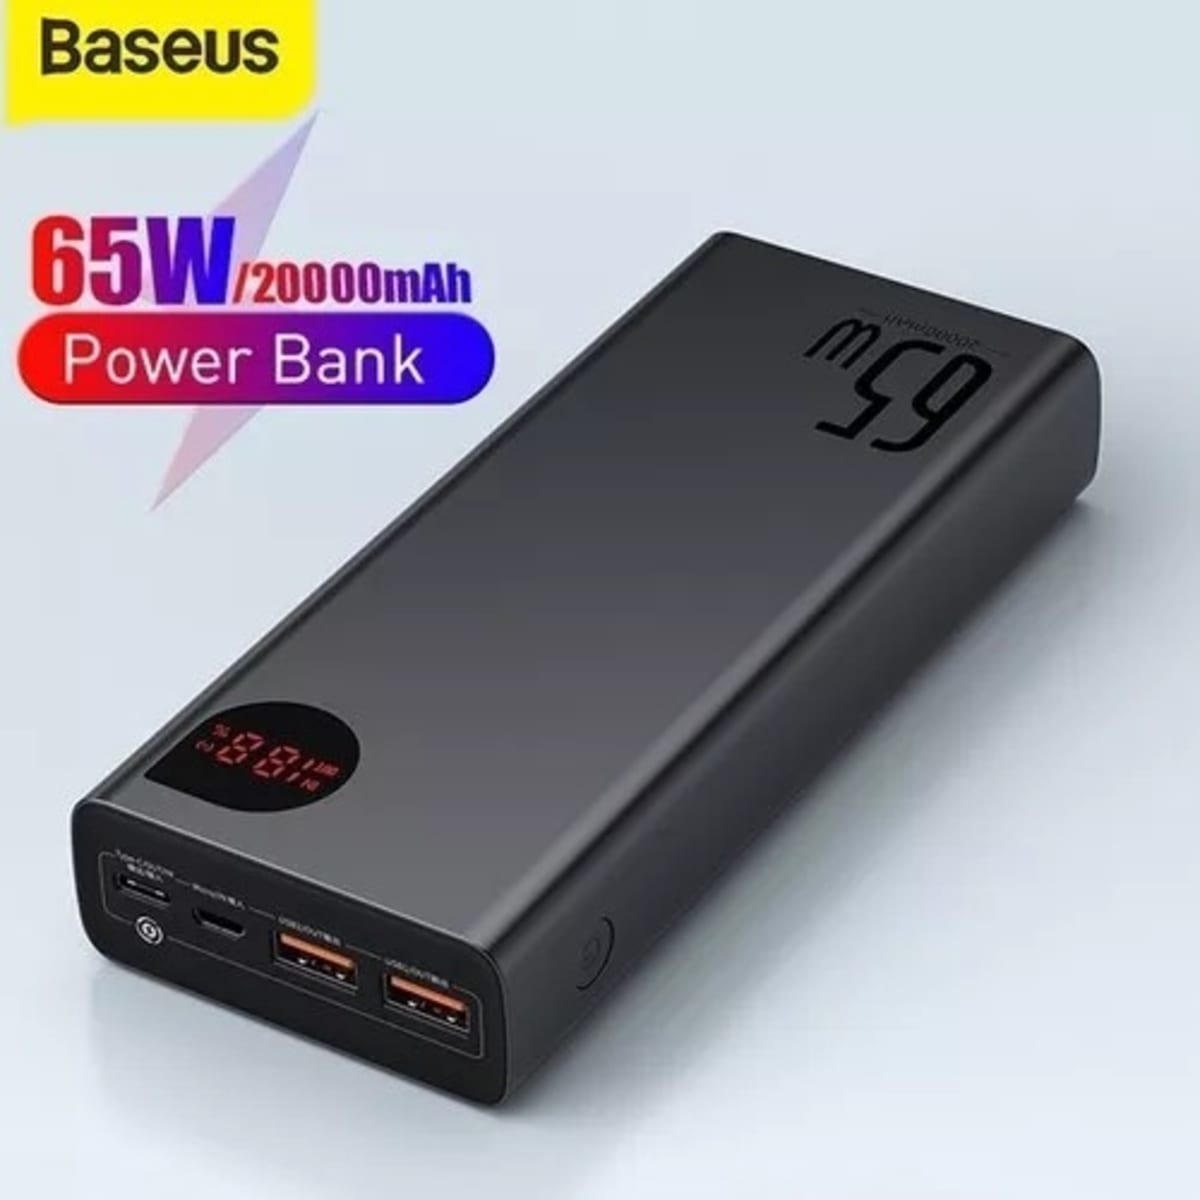 Baseus Power Banks in Nigeria for sale ▷ Prices on